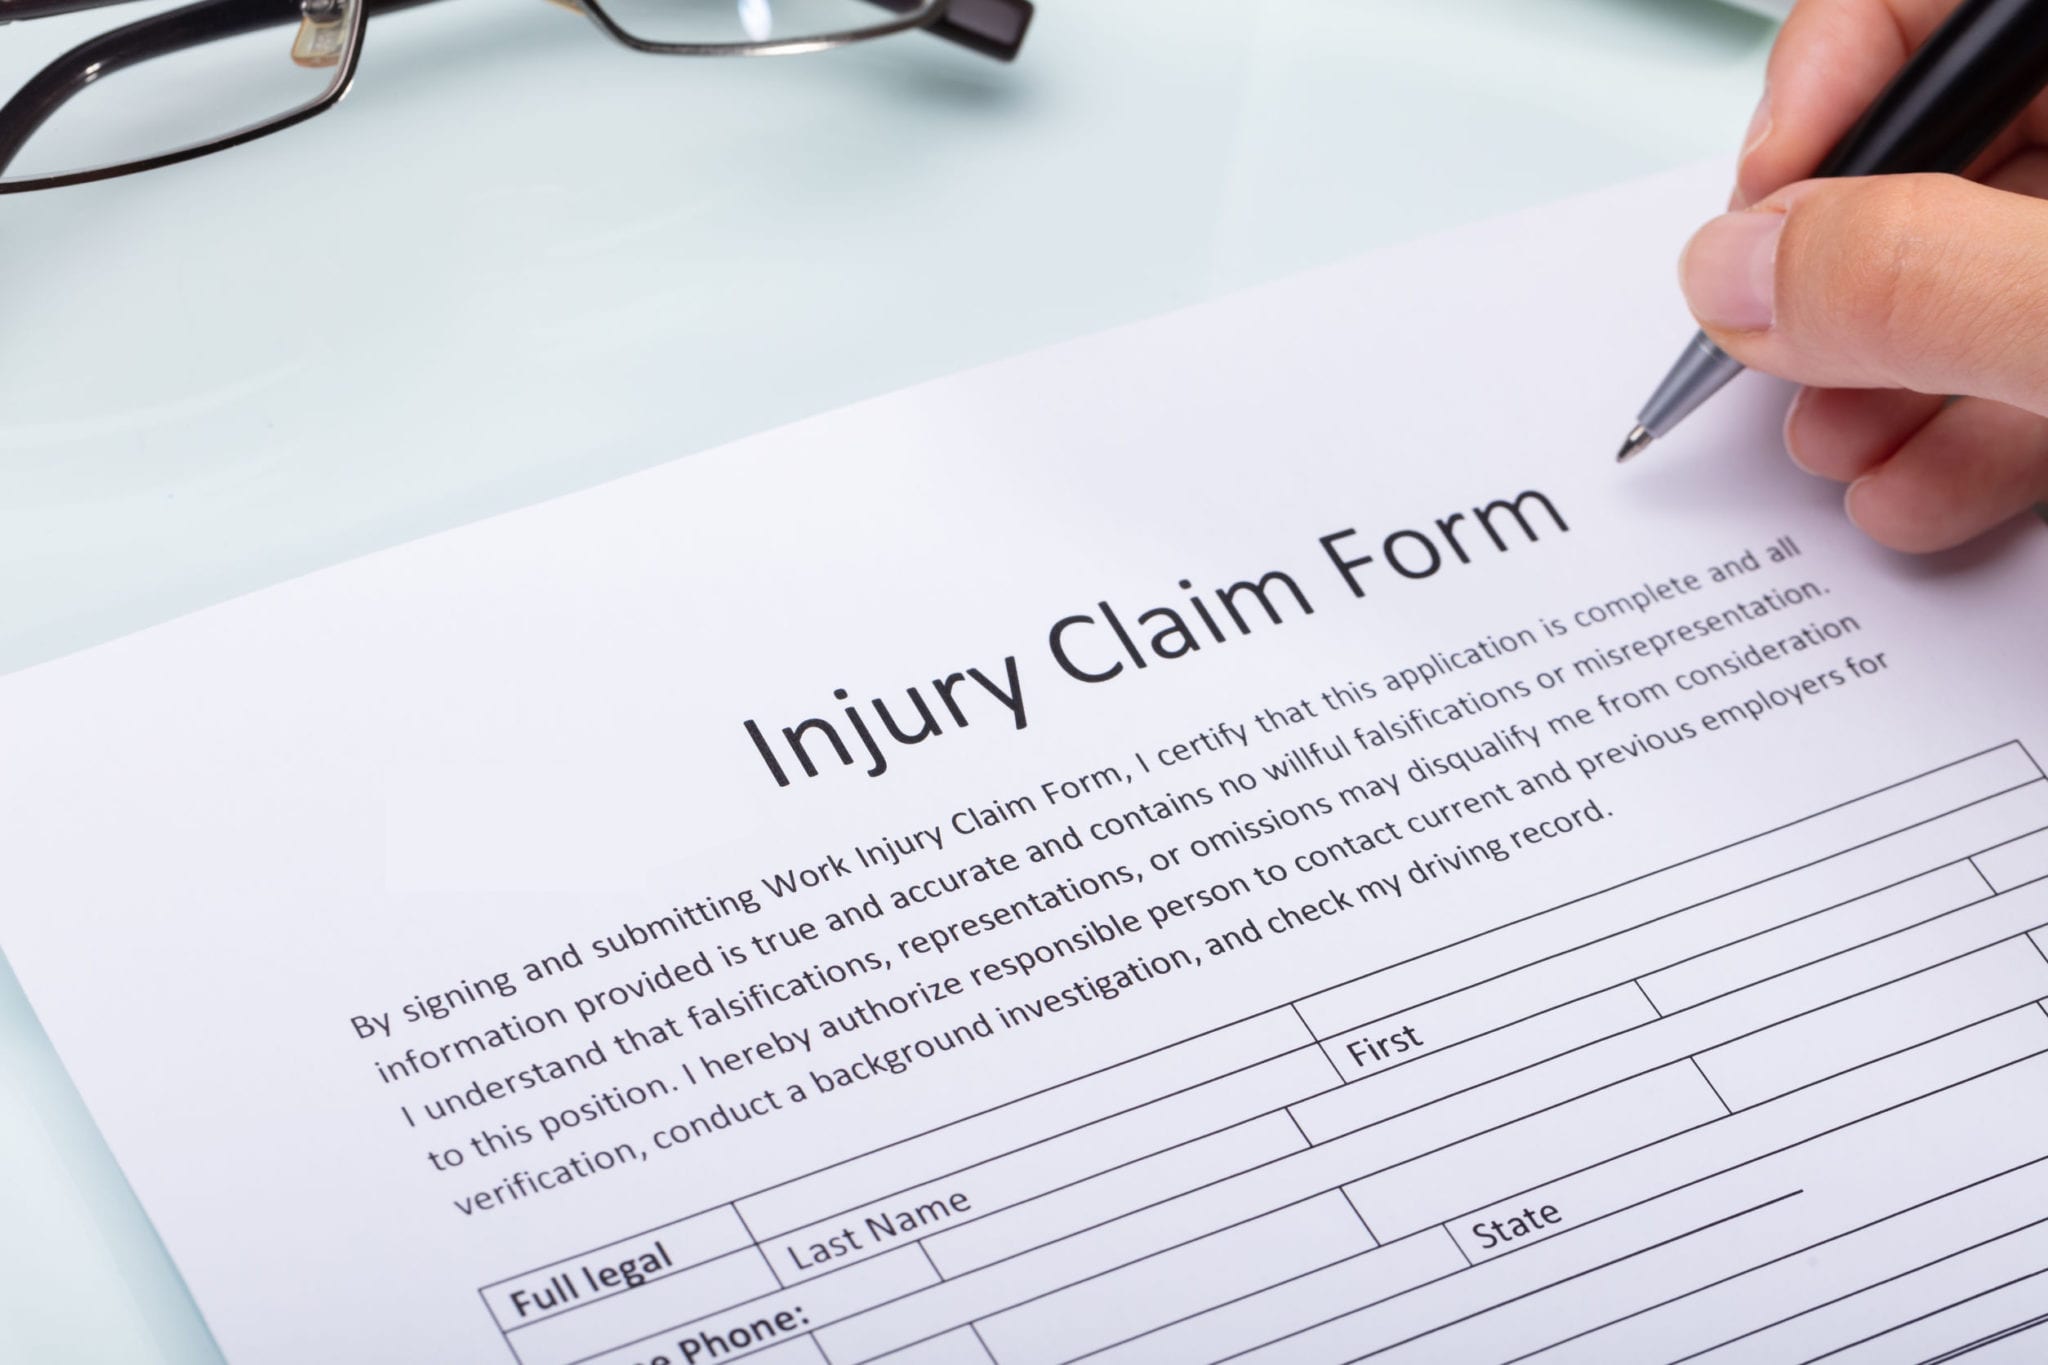 File Your Injury Claim on Time